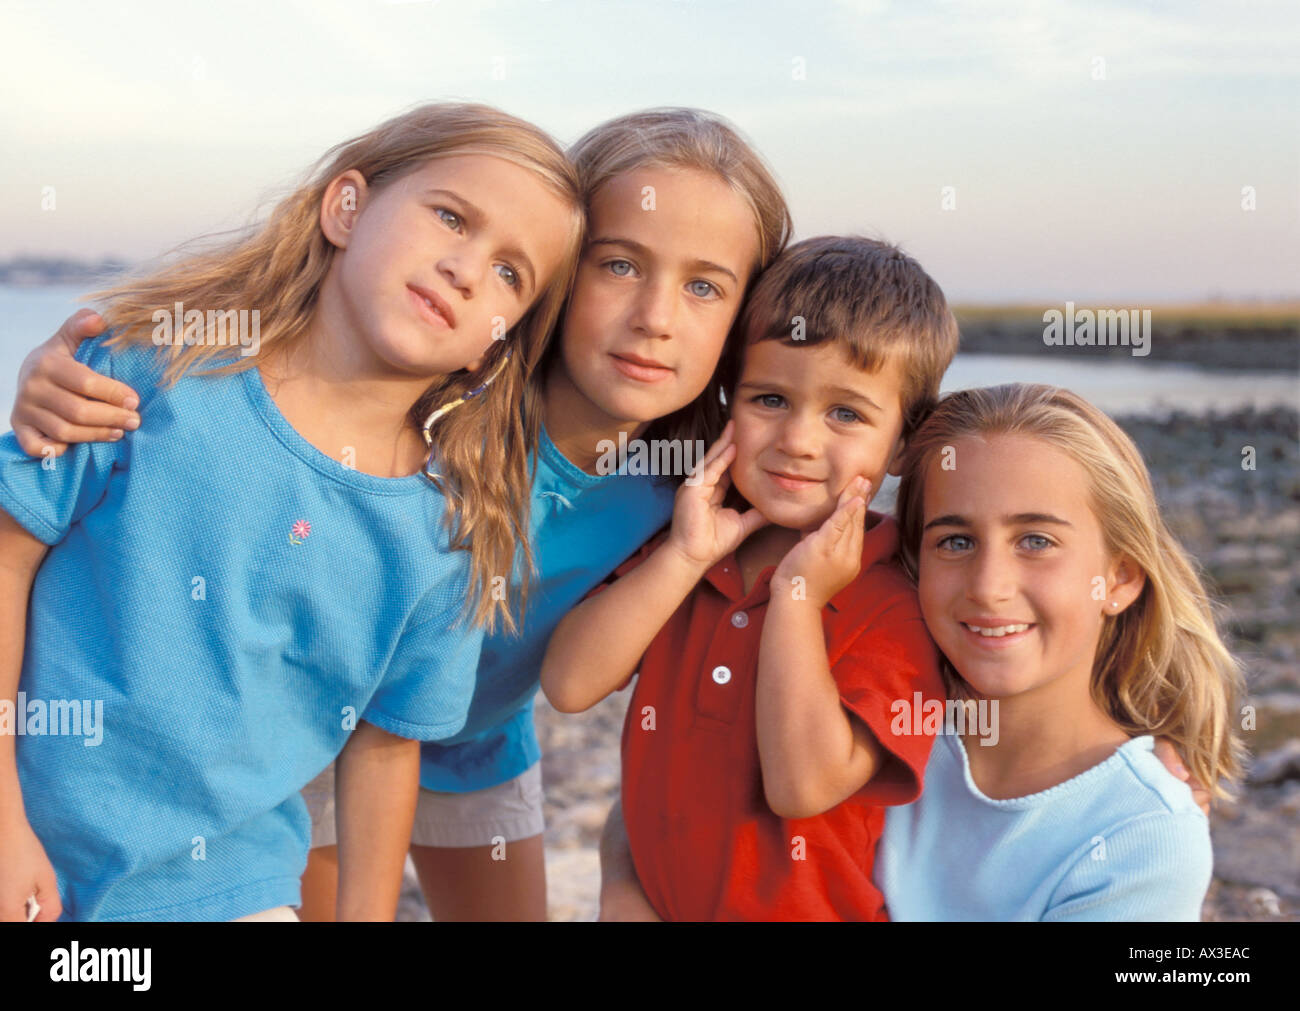 Family 3 sisters 1 brother QHTK0940 Stock Photo - Alamy